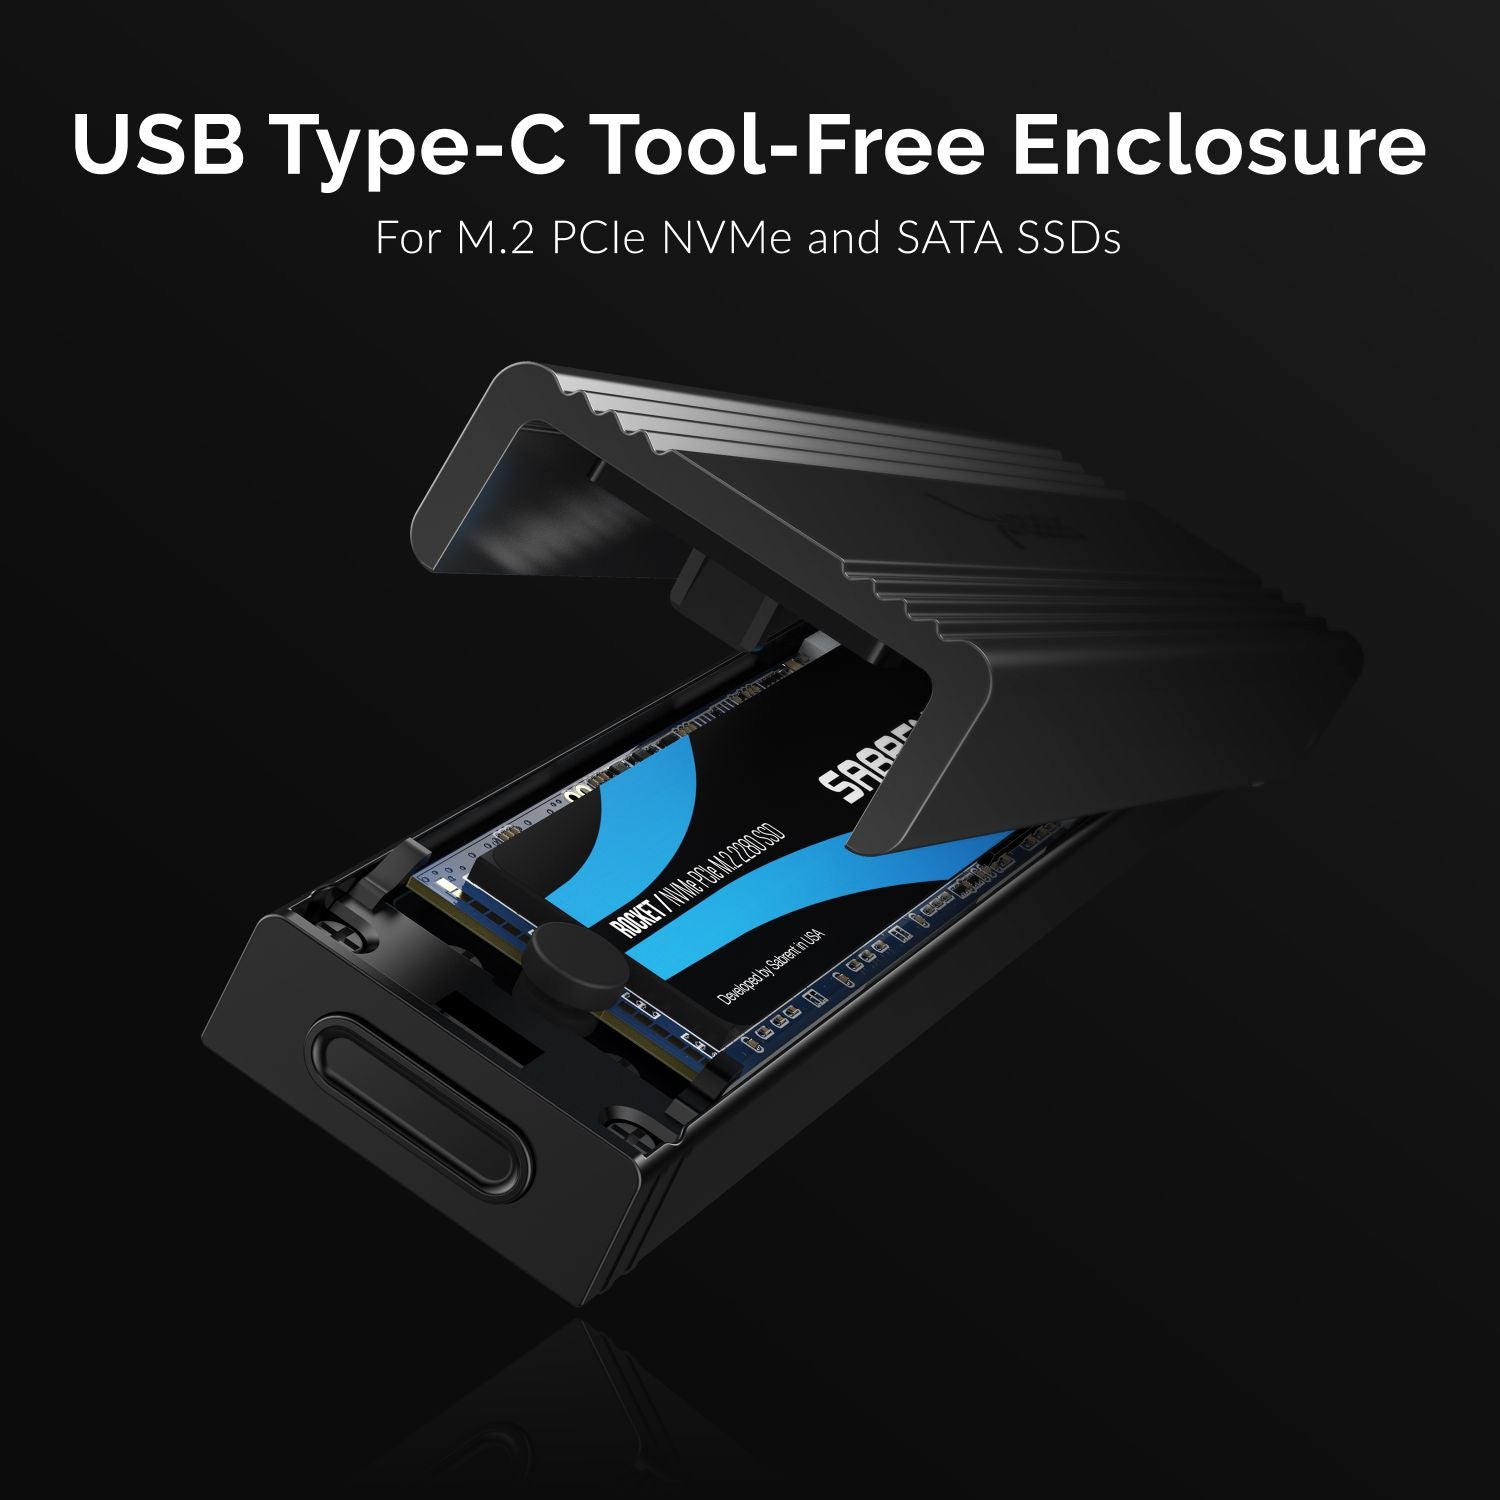 USB 3.2 Type-C Tool-Free Enclosure for M.2 PCIe NVMe and SATA SSDs Sabrent